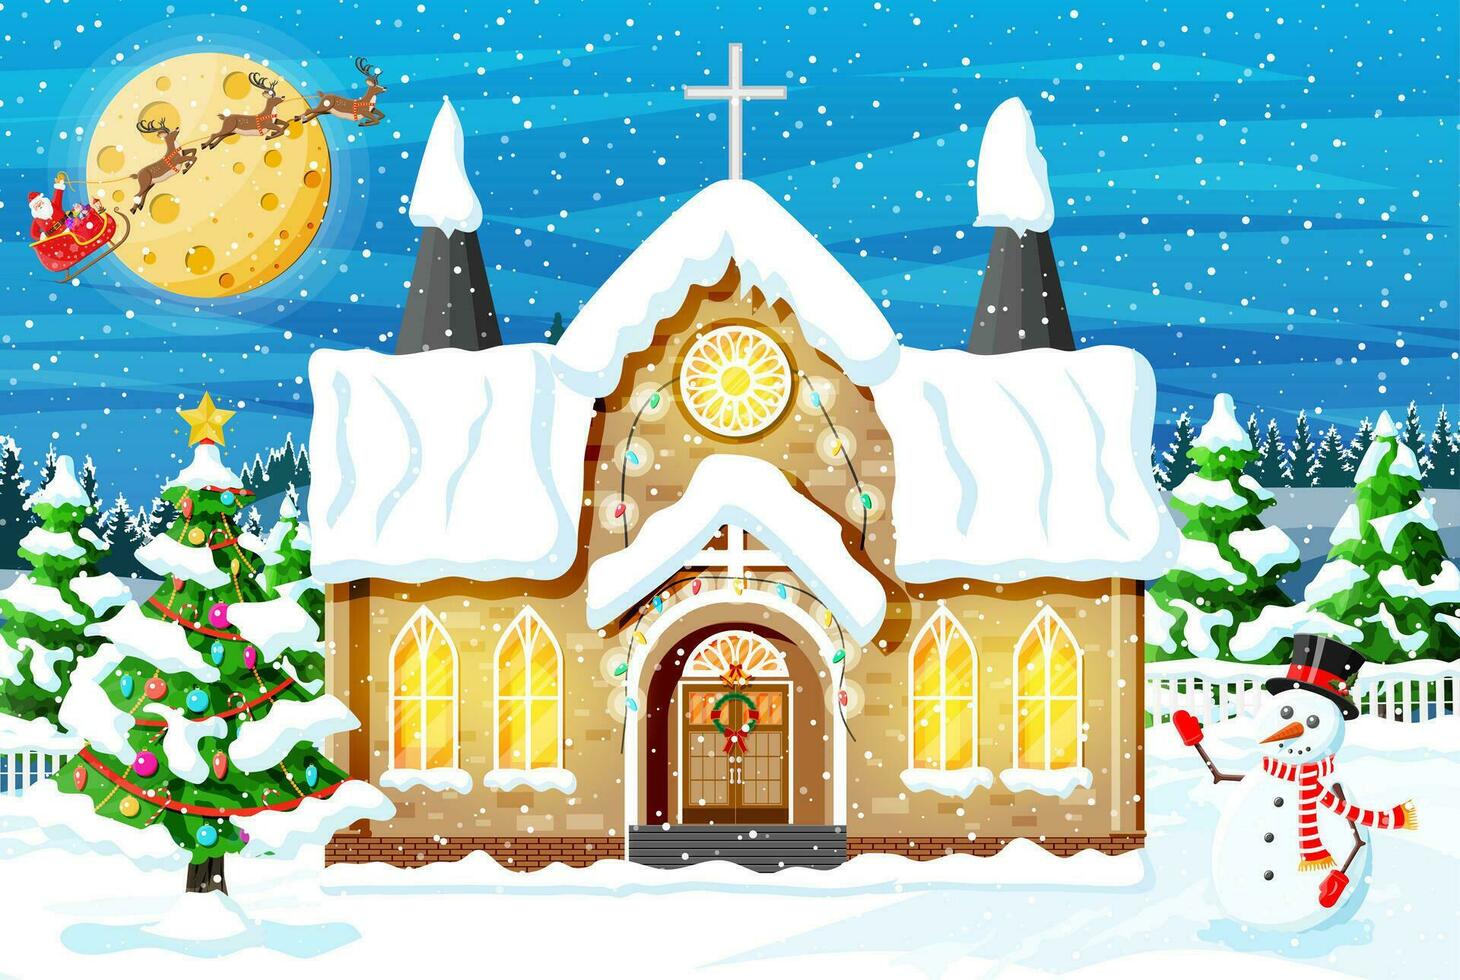 Church Covered Snow. Building in Holiday Ornament. Christmas Landscape, Tree, Snowman Forest Santa Sleigh Reindeers. New Year Decoration. Merry Christmas Holiday Xmas Celebration. Vector illustration